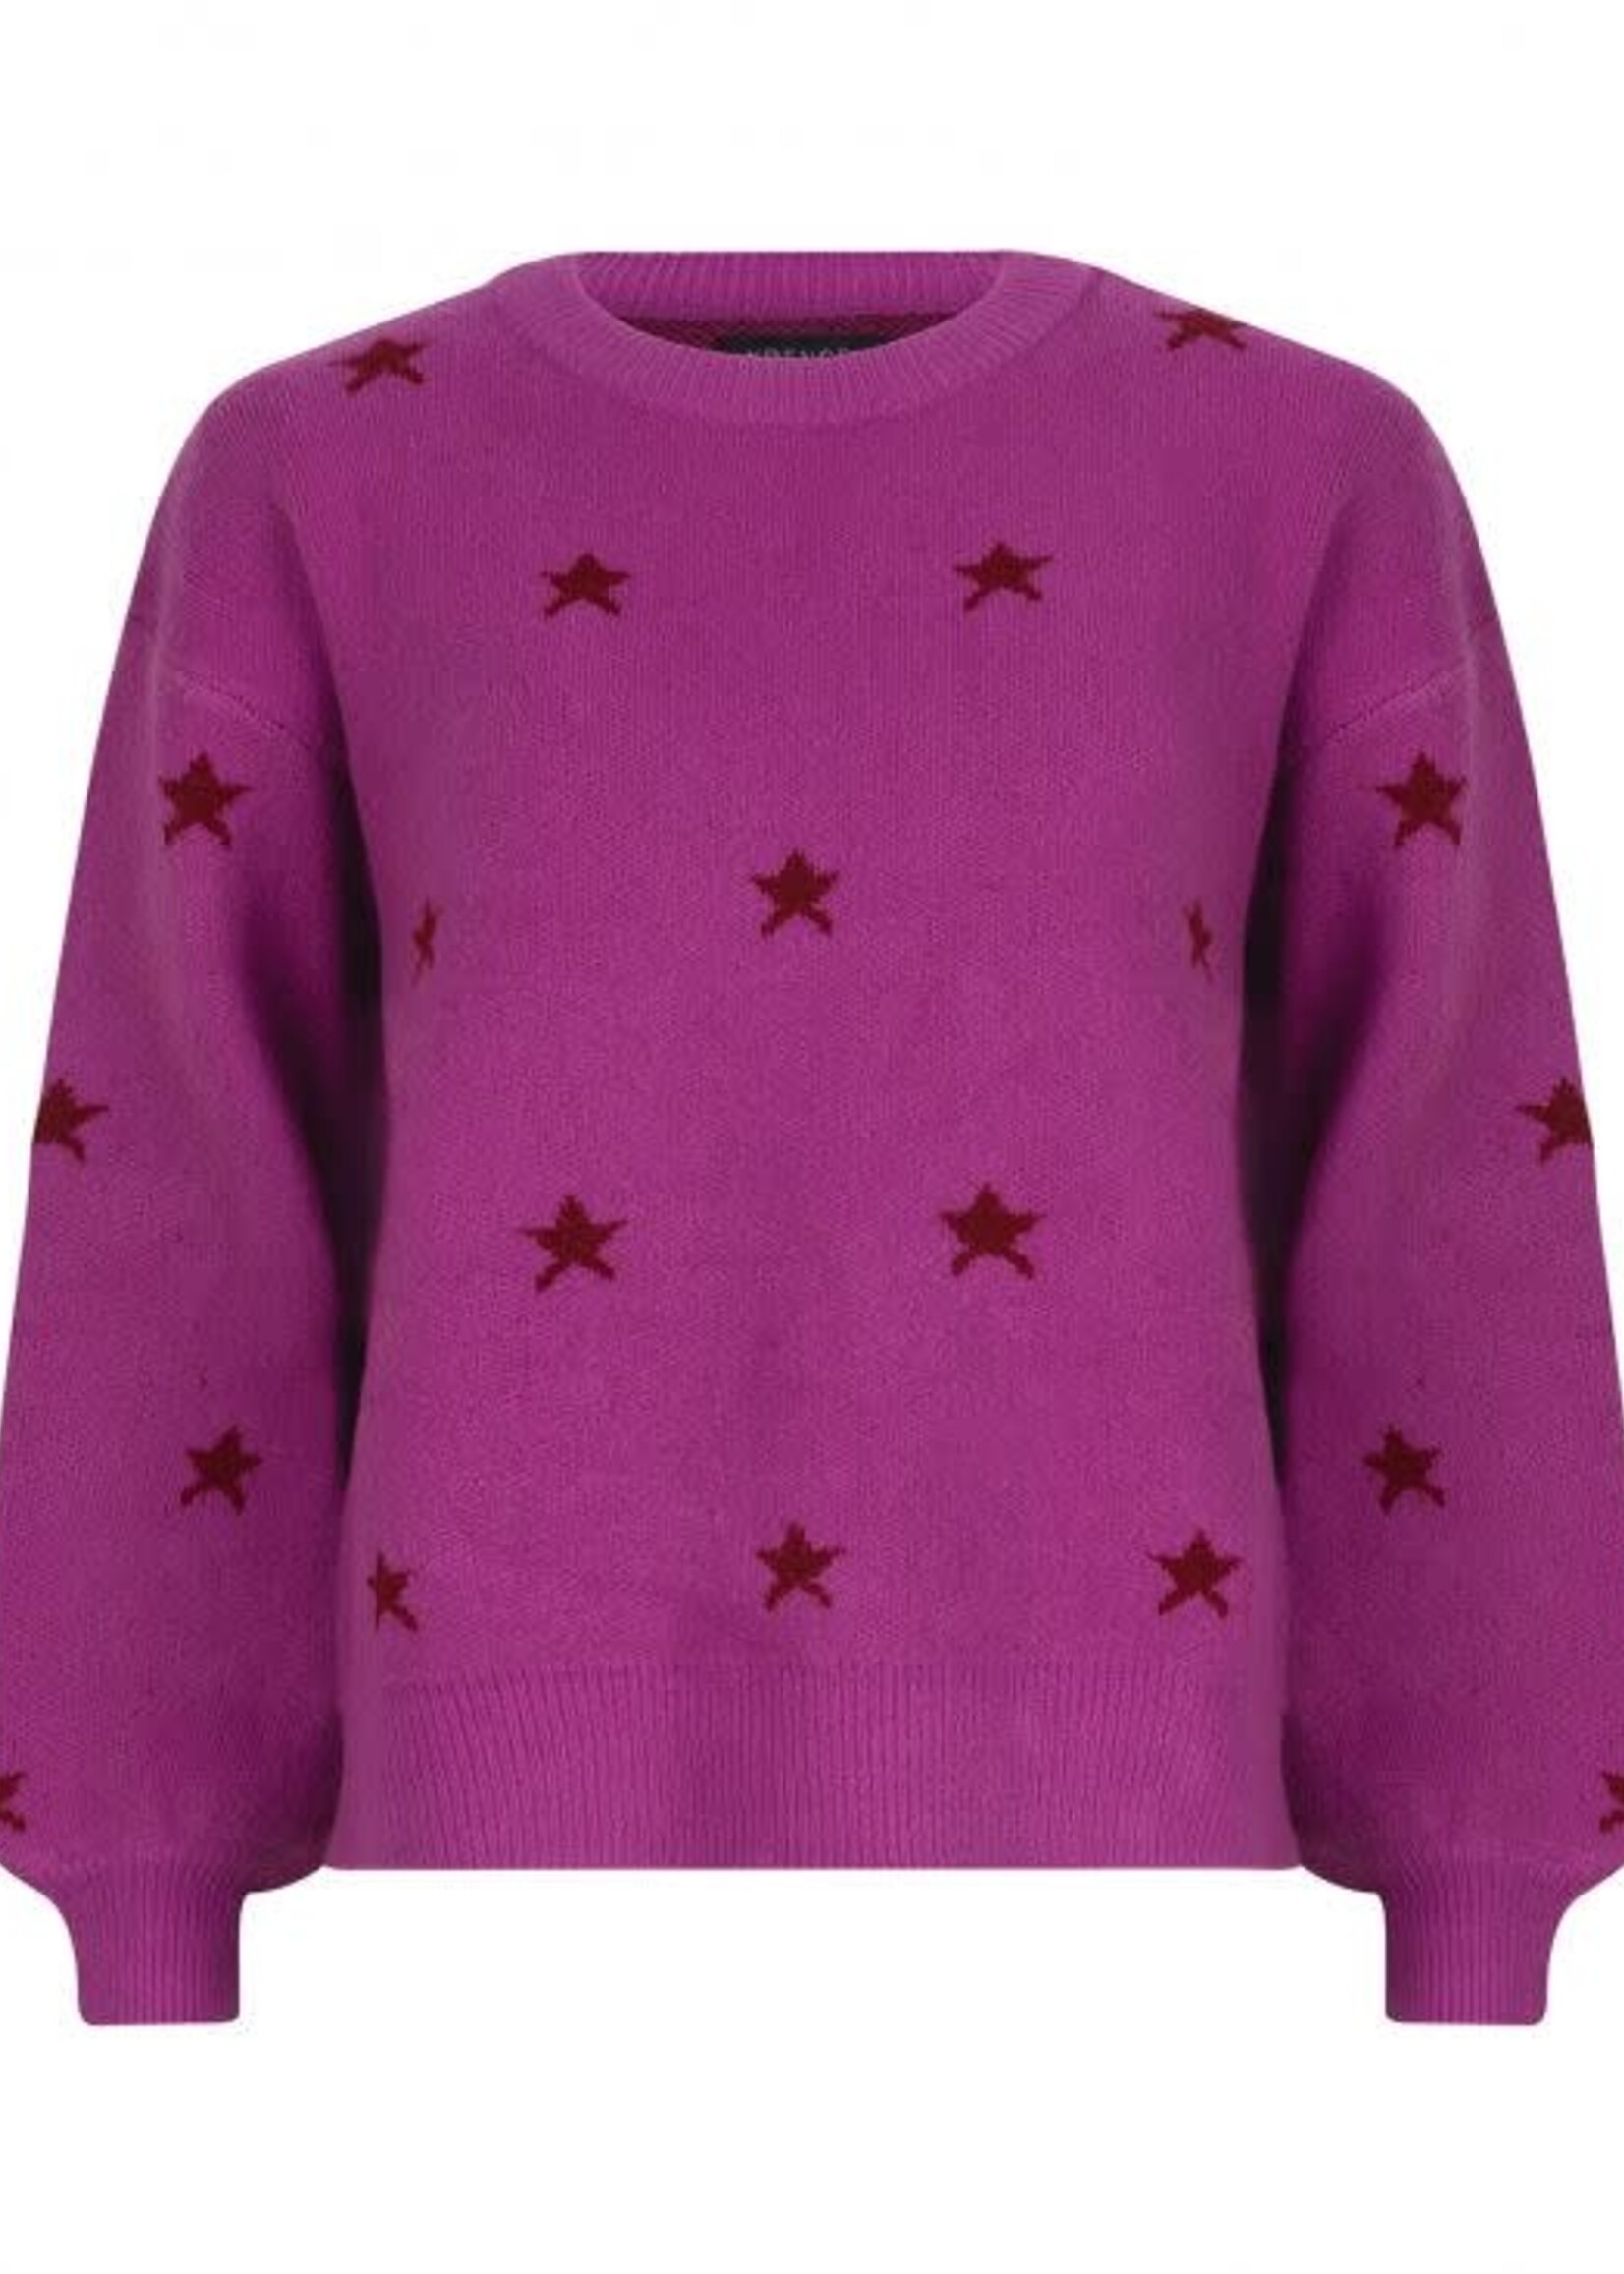 Ydence KNITTED Sweater Star purple/red wine